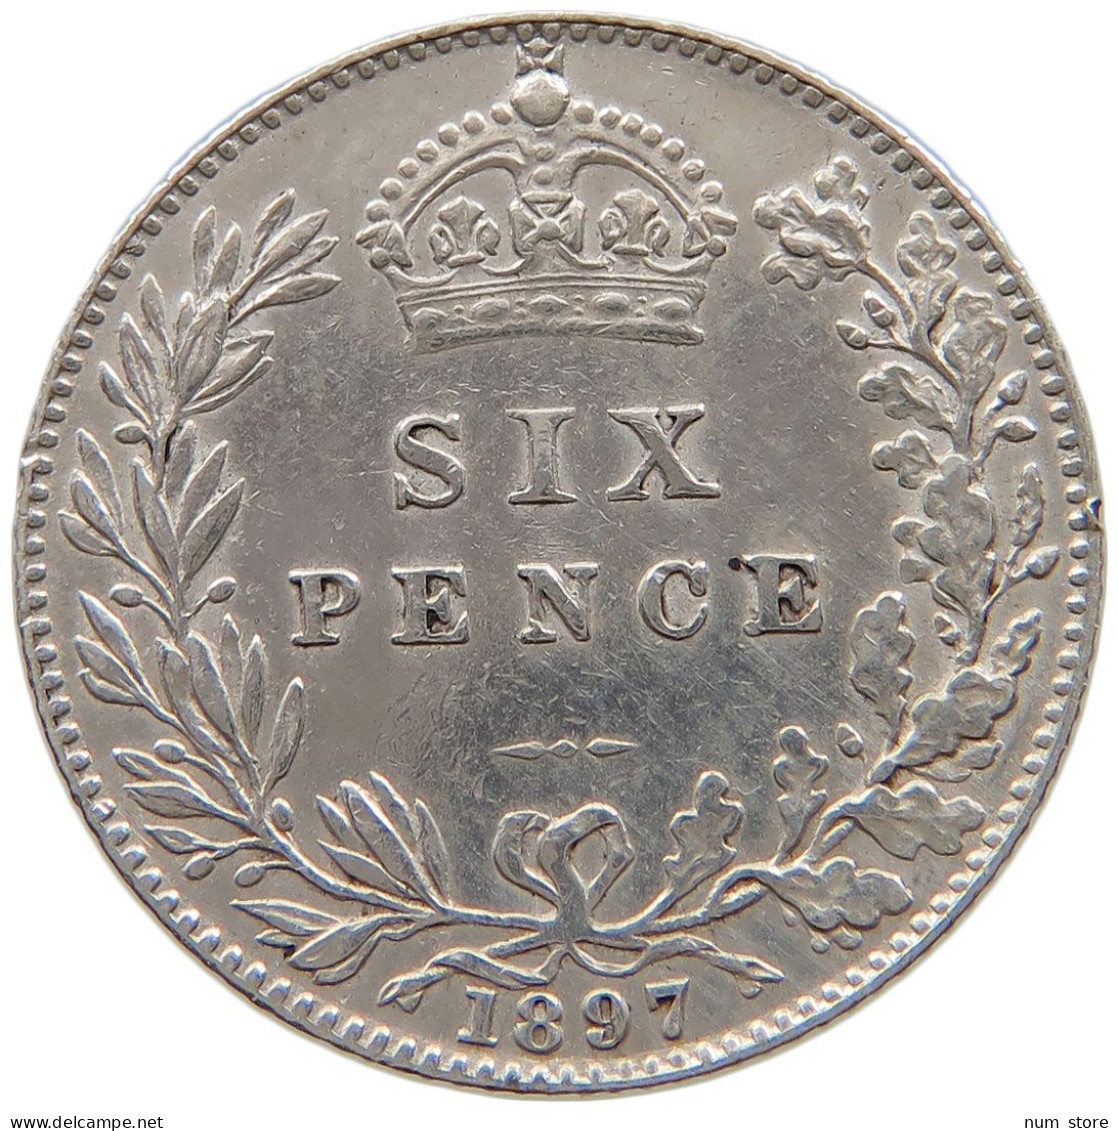 GREAT BRITAIN SIXPENCE 1897 Victoria 1837-1901 #t158 0389 - H. 6 Pence